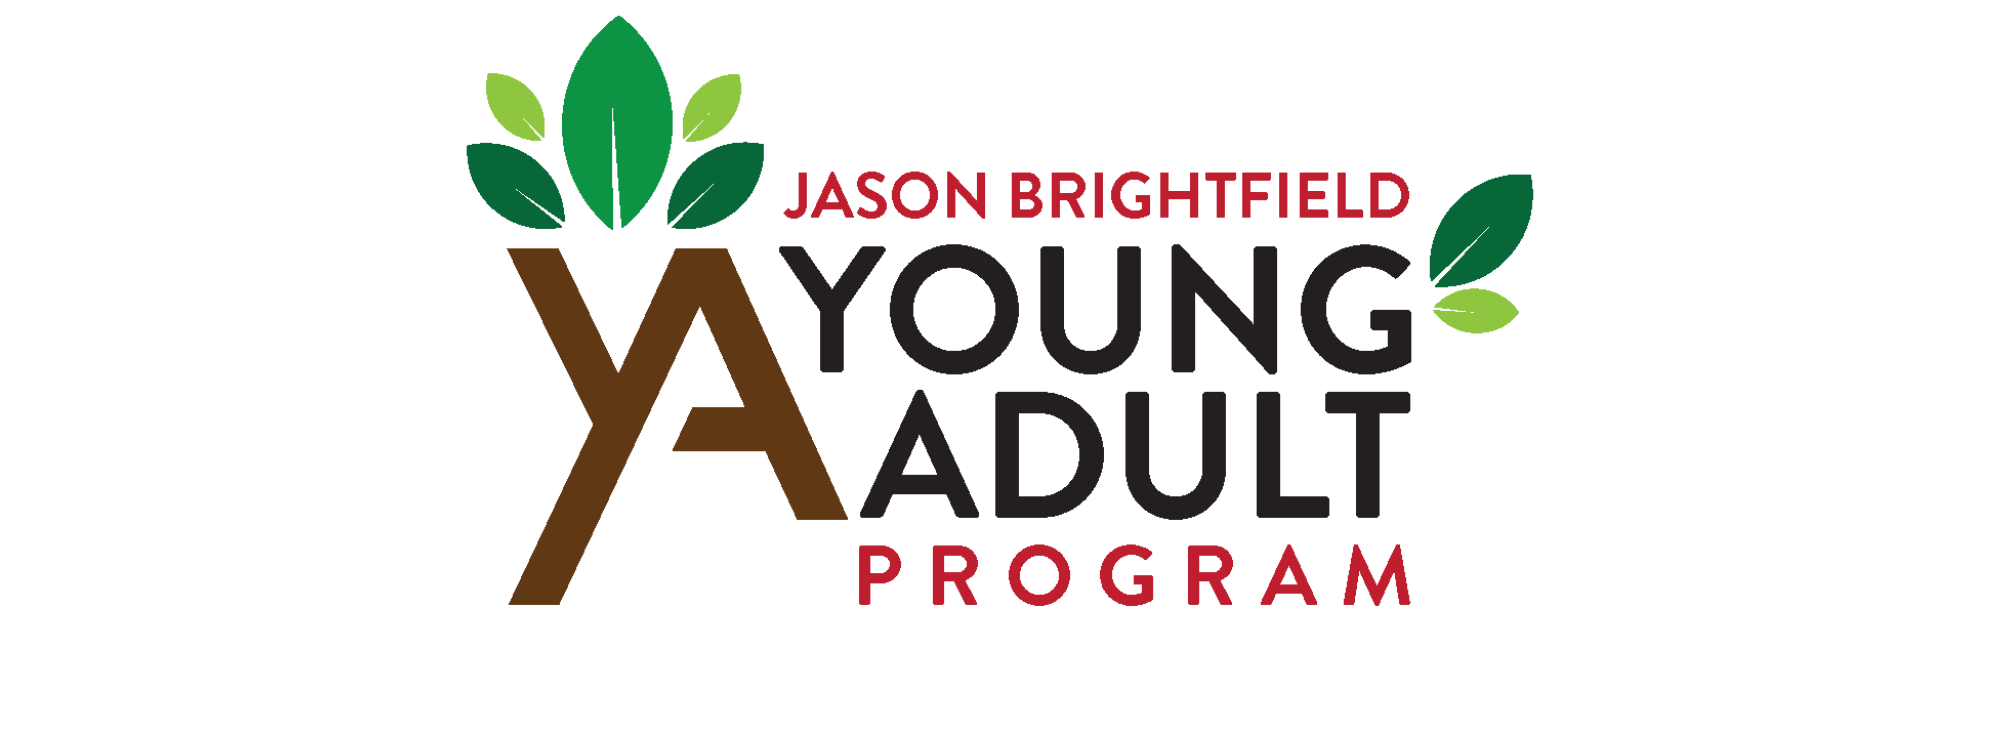 Unique program designed for young adults ages 18-40.